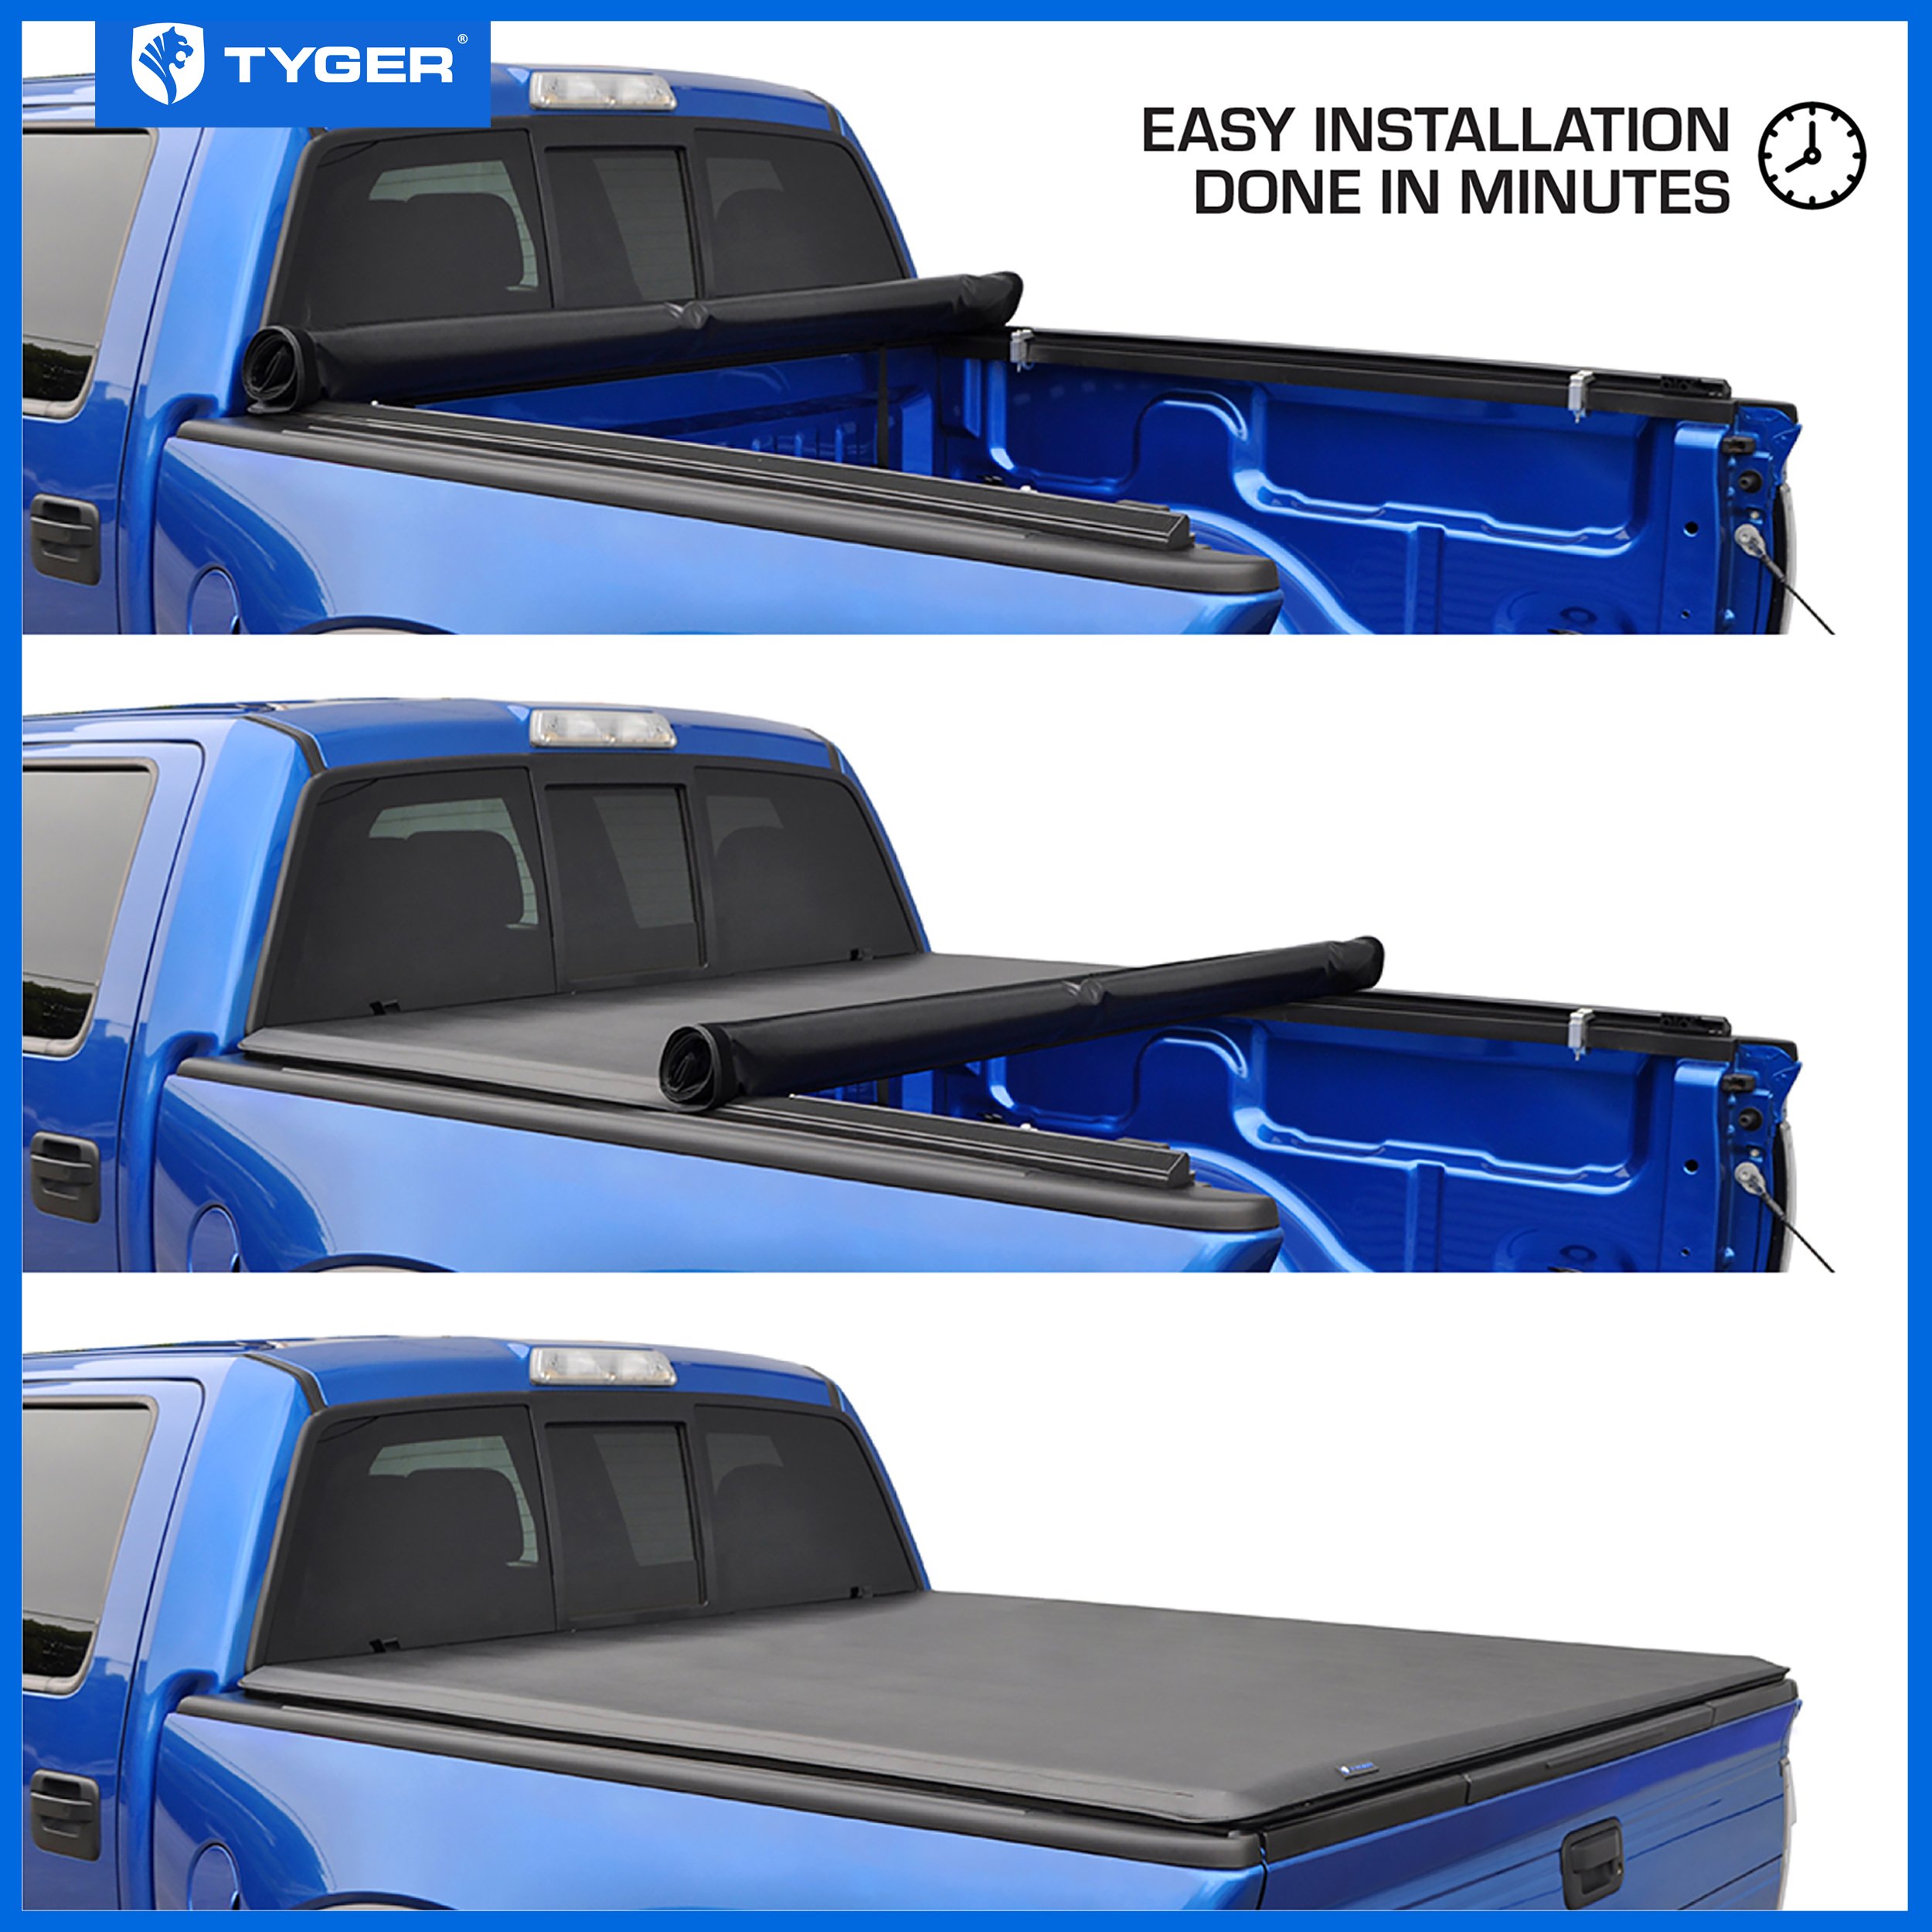 TYGER T1 Soft Roll-up fit 2004-2012 Chevy Colorado GMC Canyon